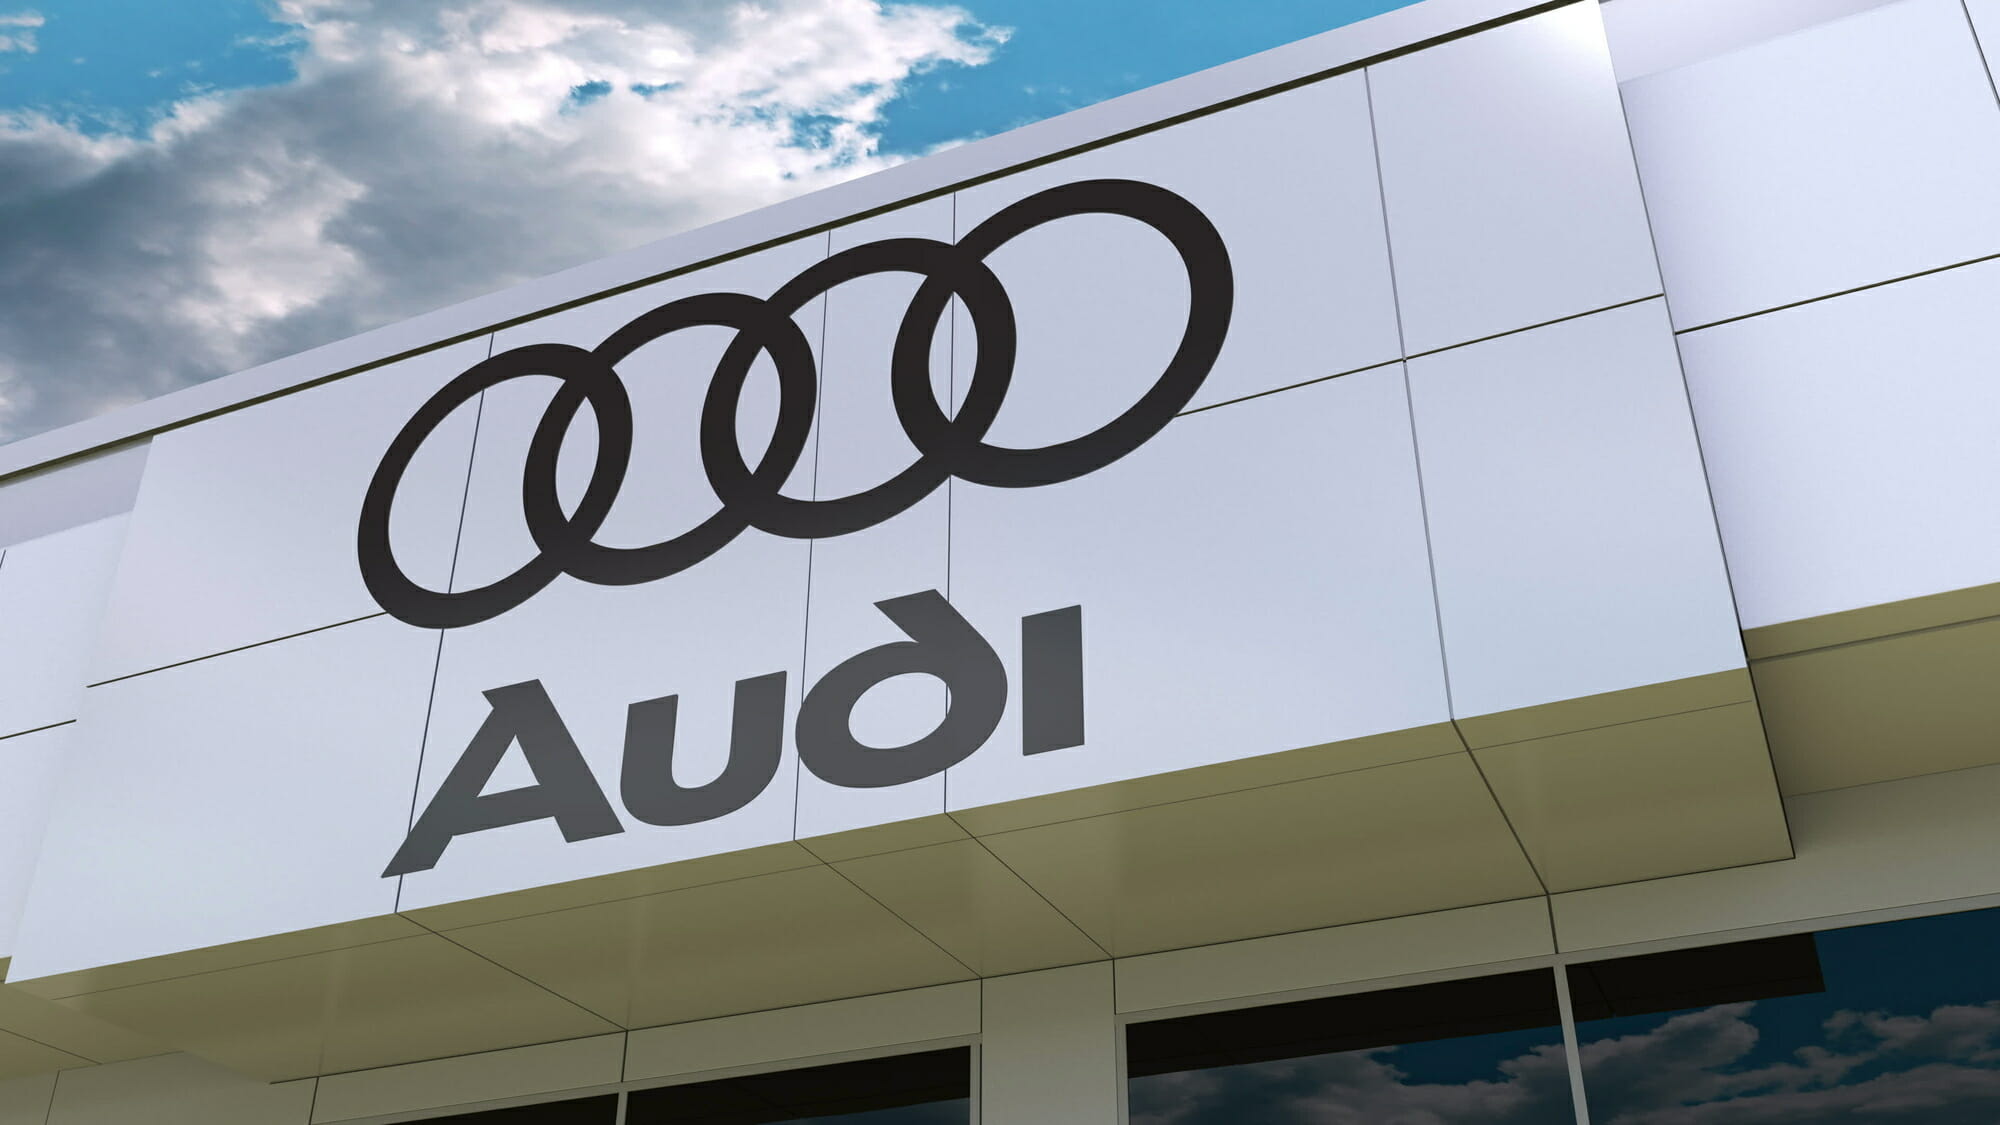 How Reliable Are Audi Vehicles?